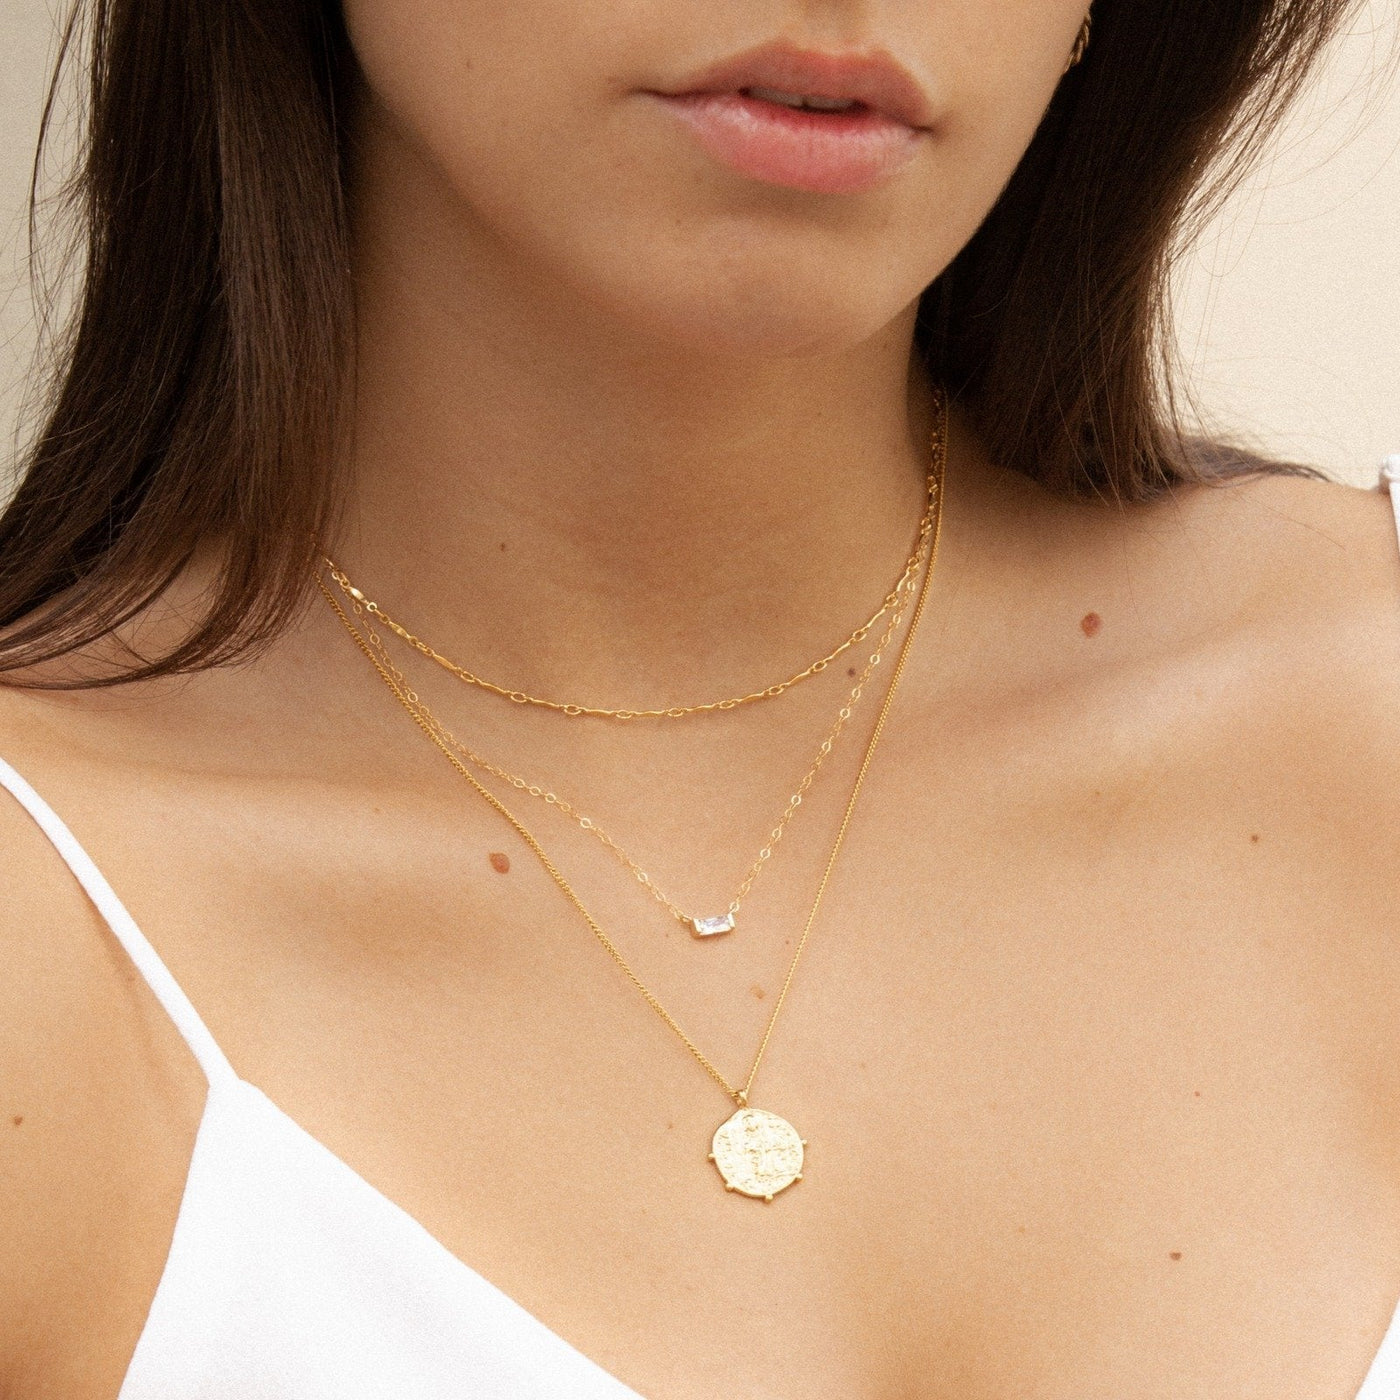 Dainty Baguette Necklace by Simple & Dainty Jewelry